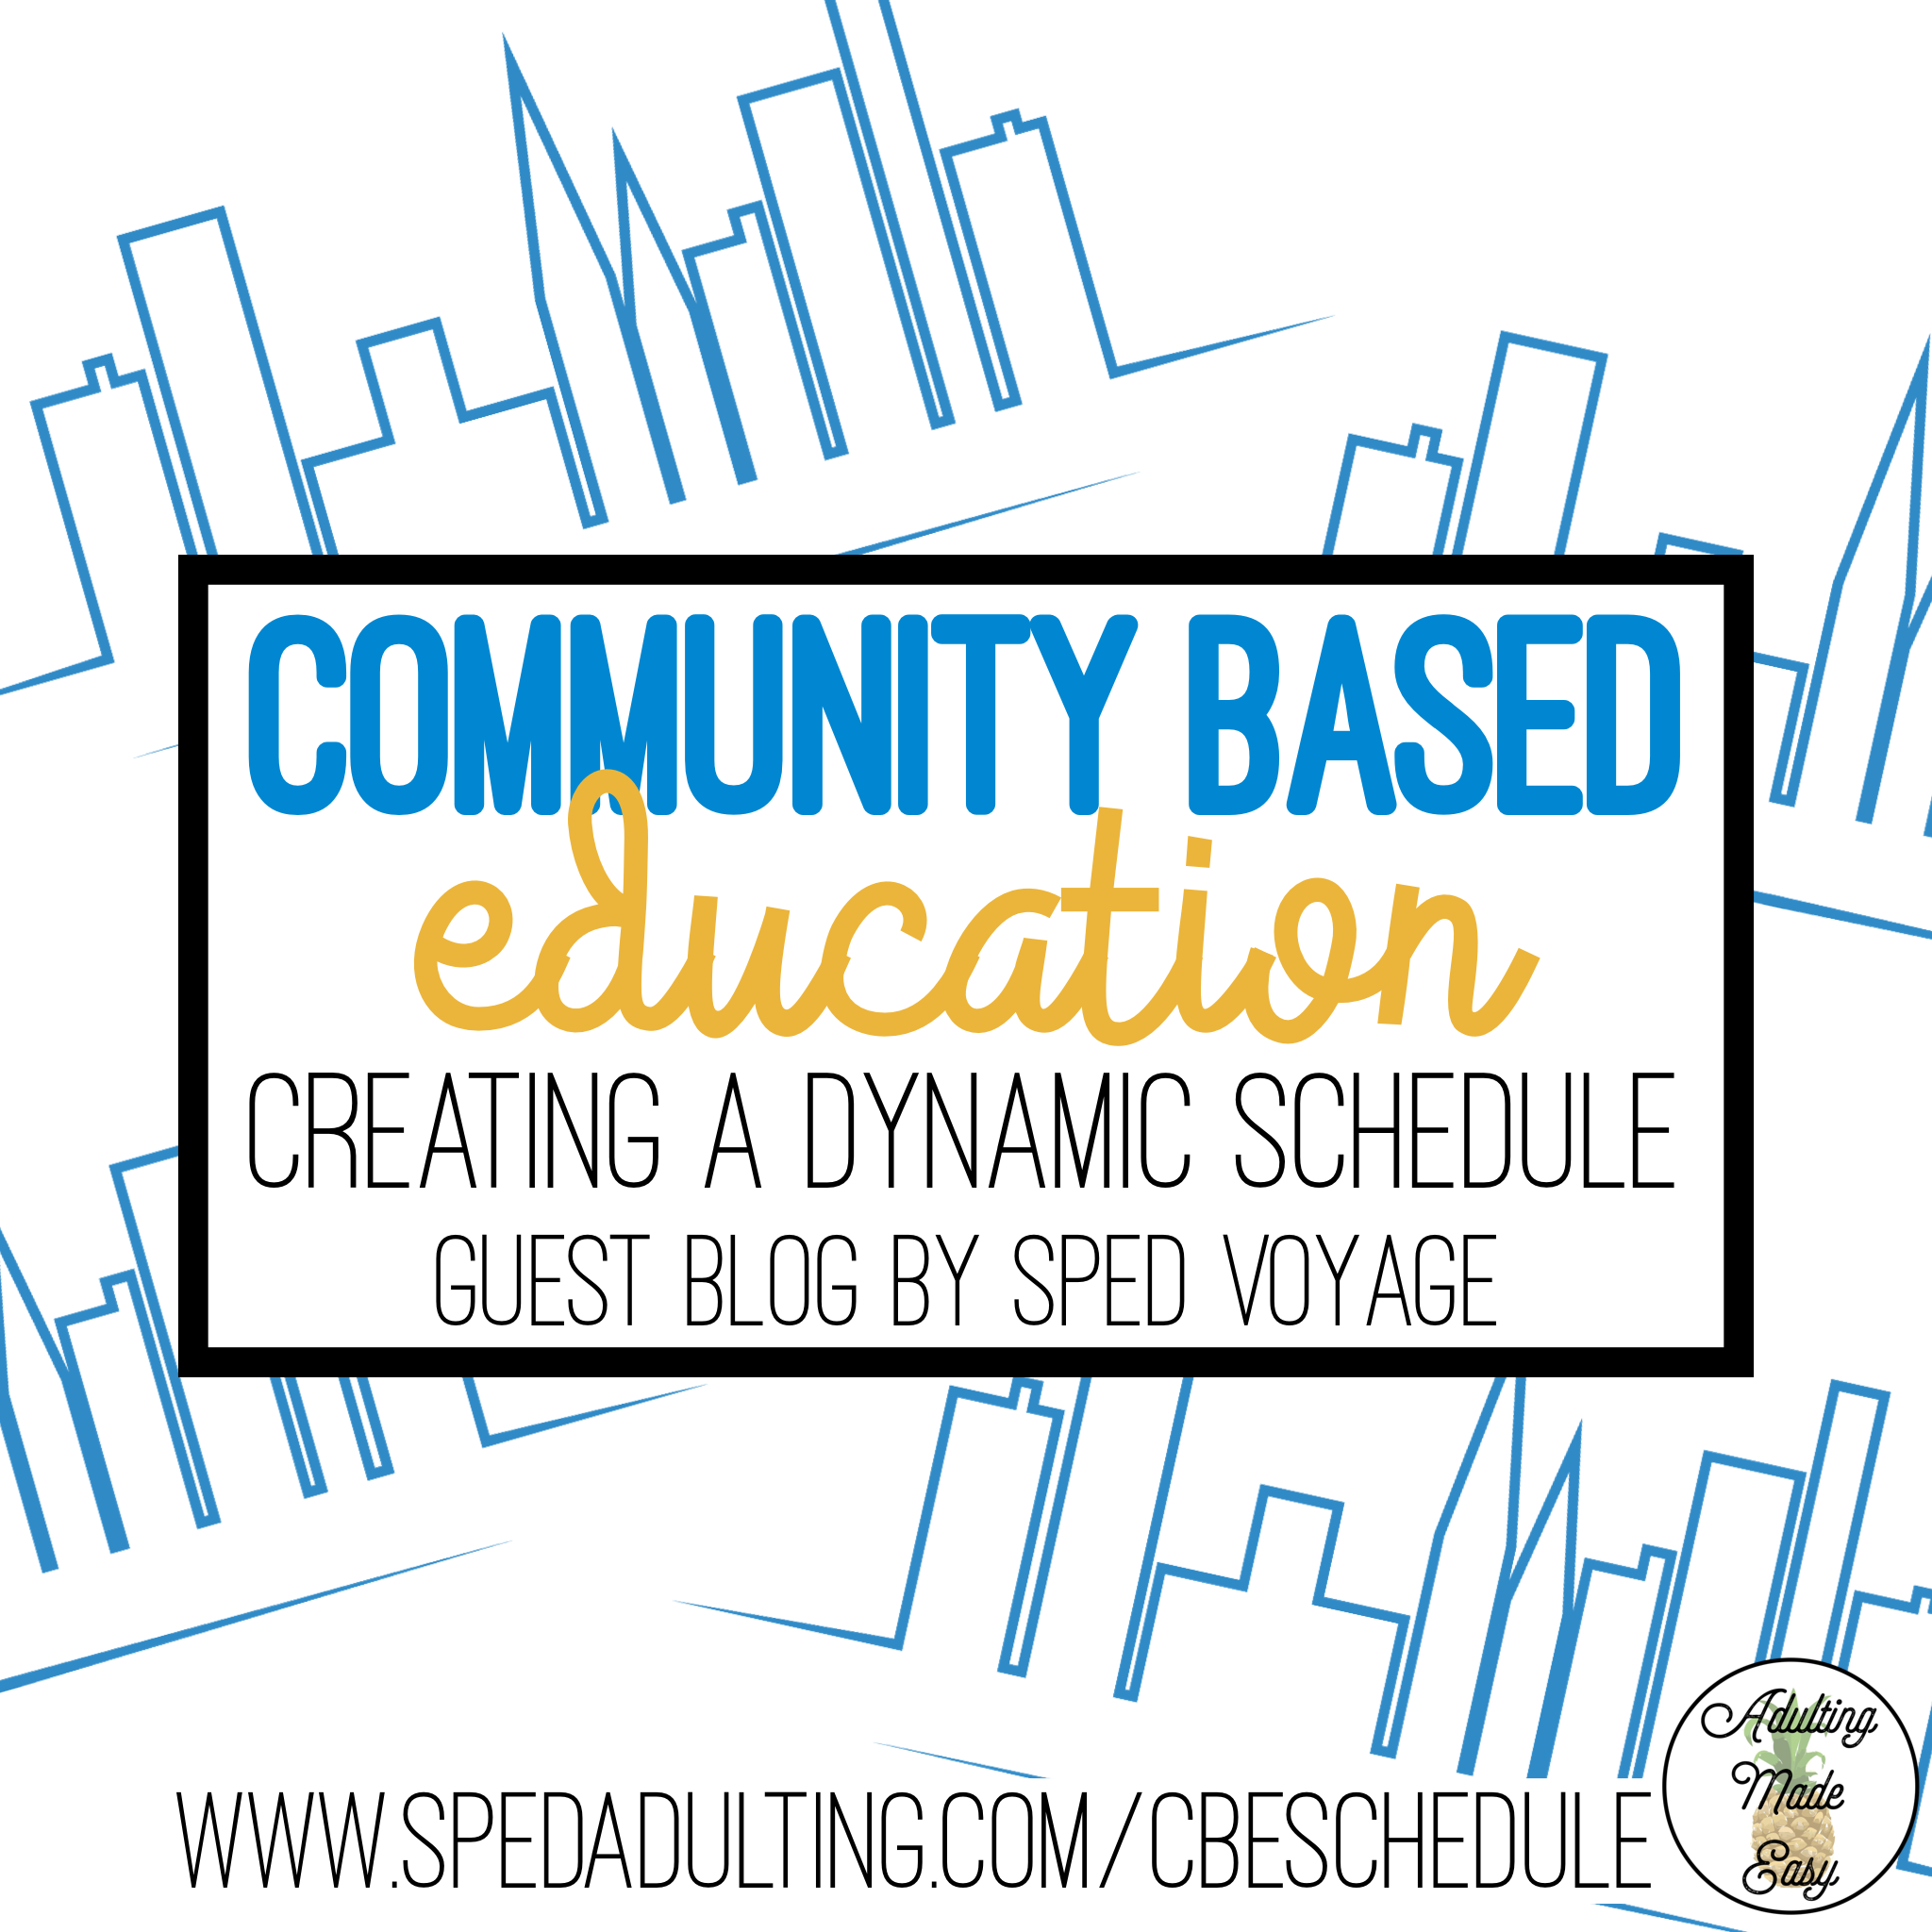 Community Based Education: creating a dynamic schedule